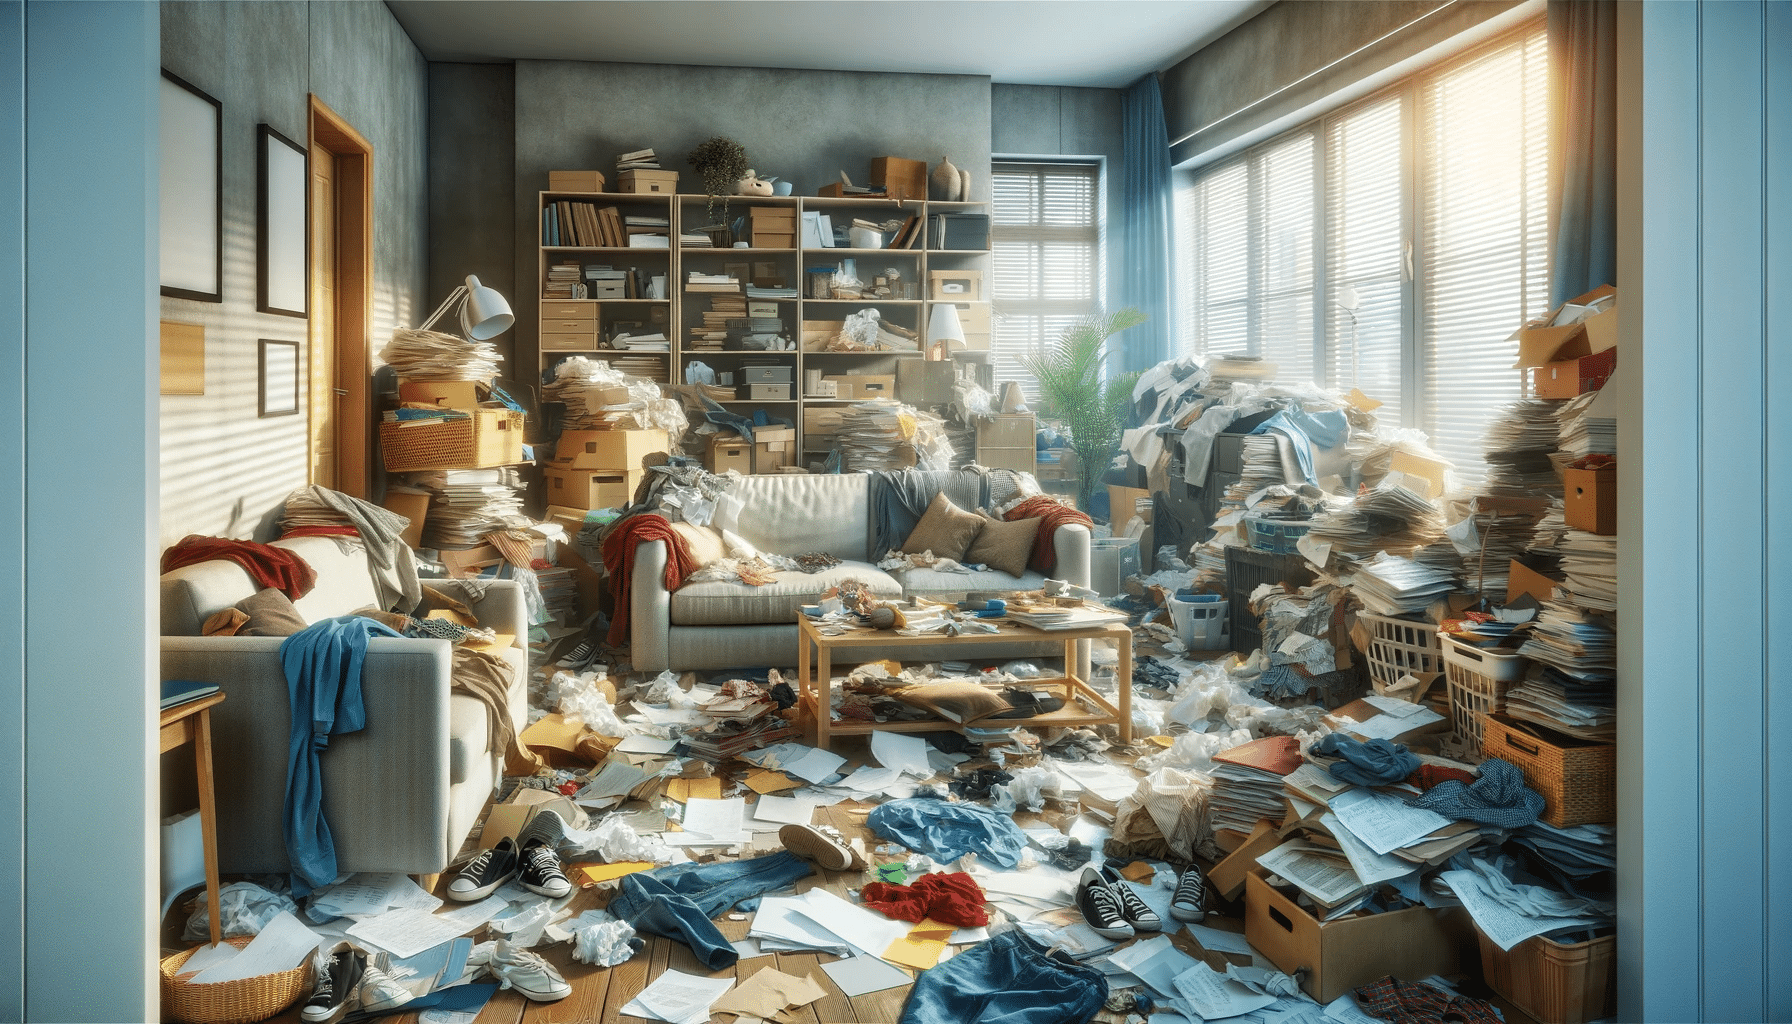 How To Clean A Hoarders House In One Day